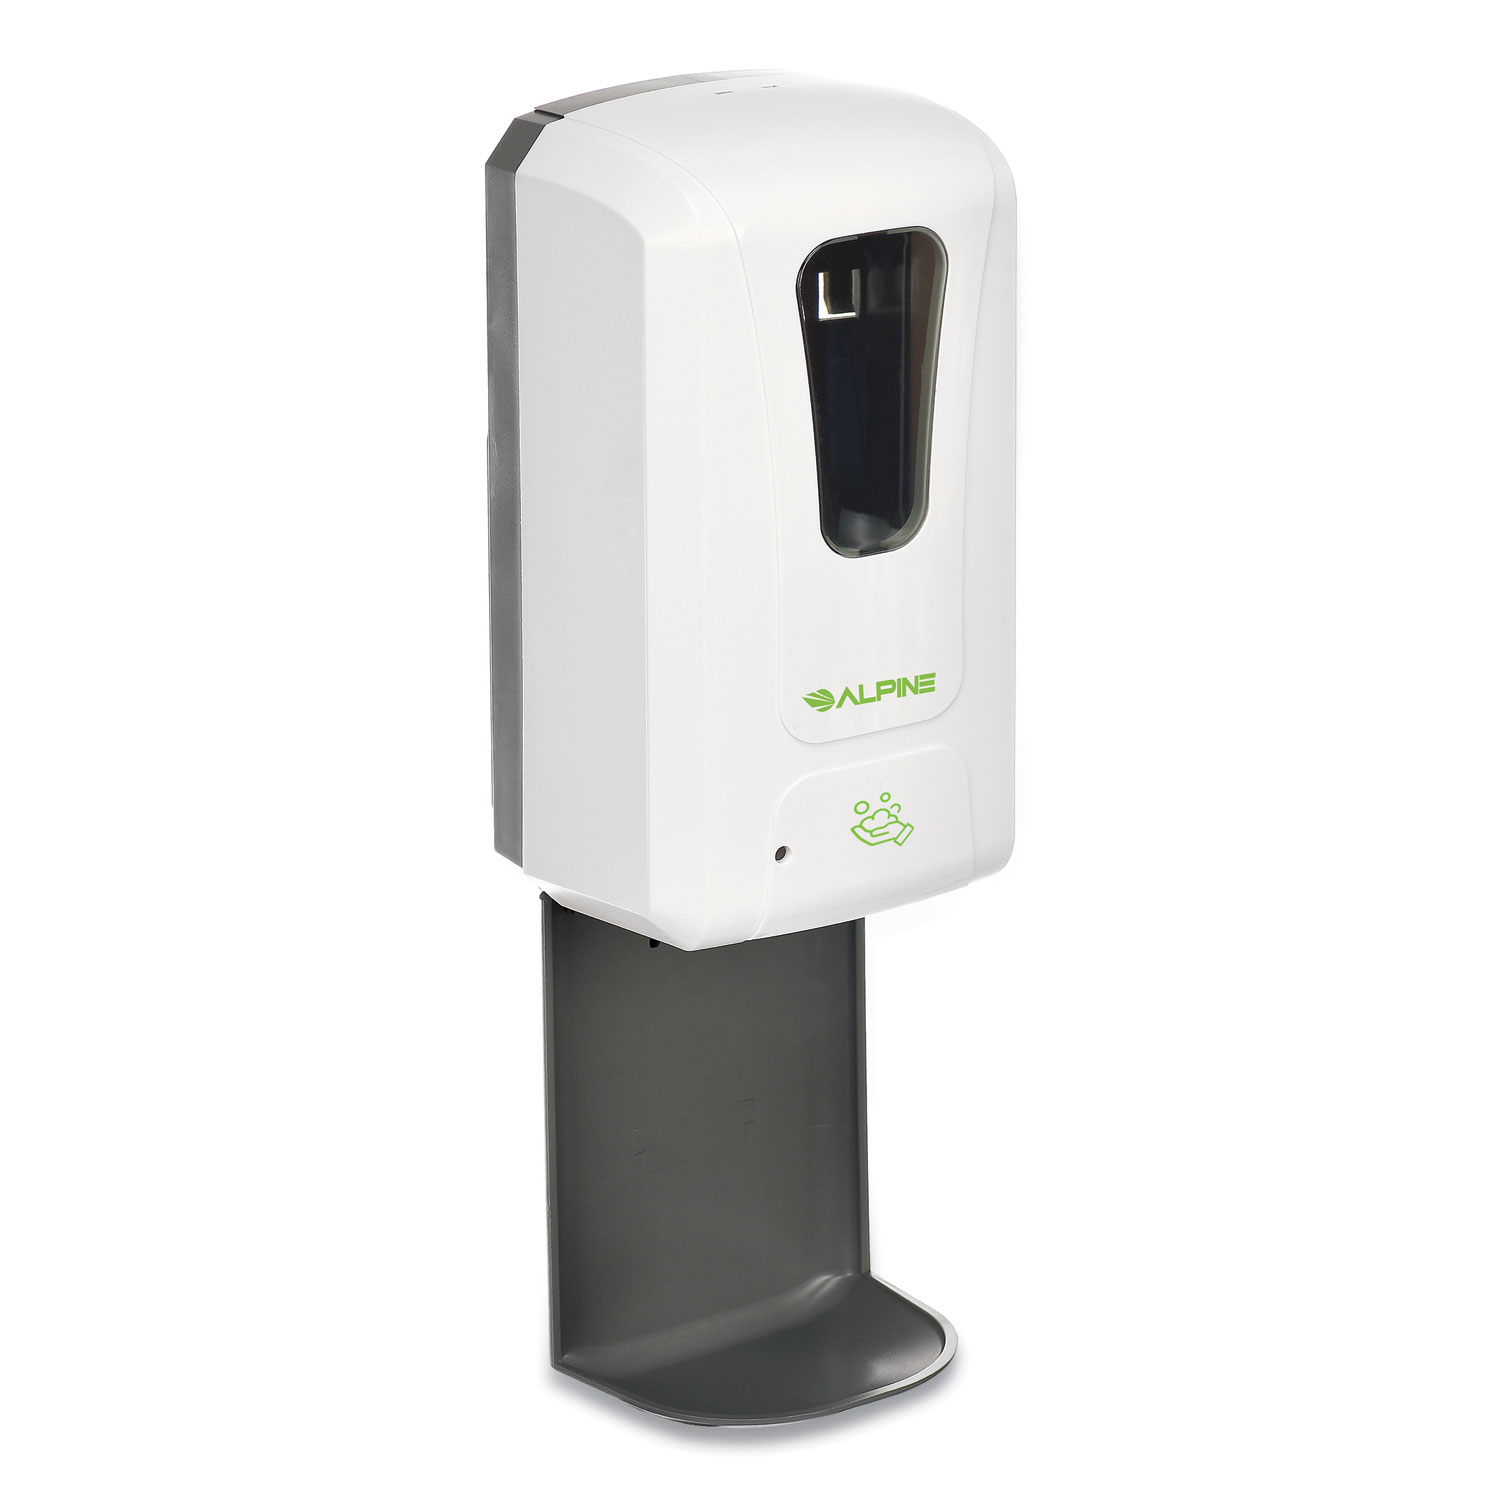  Alpine 430FT Automatic Hands-Free Foam Hand Sanitizer/Soap Dispenser with Drip Tray, 1,200 mL, 6 x 4.4 x 18, White (GN1430FT) 